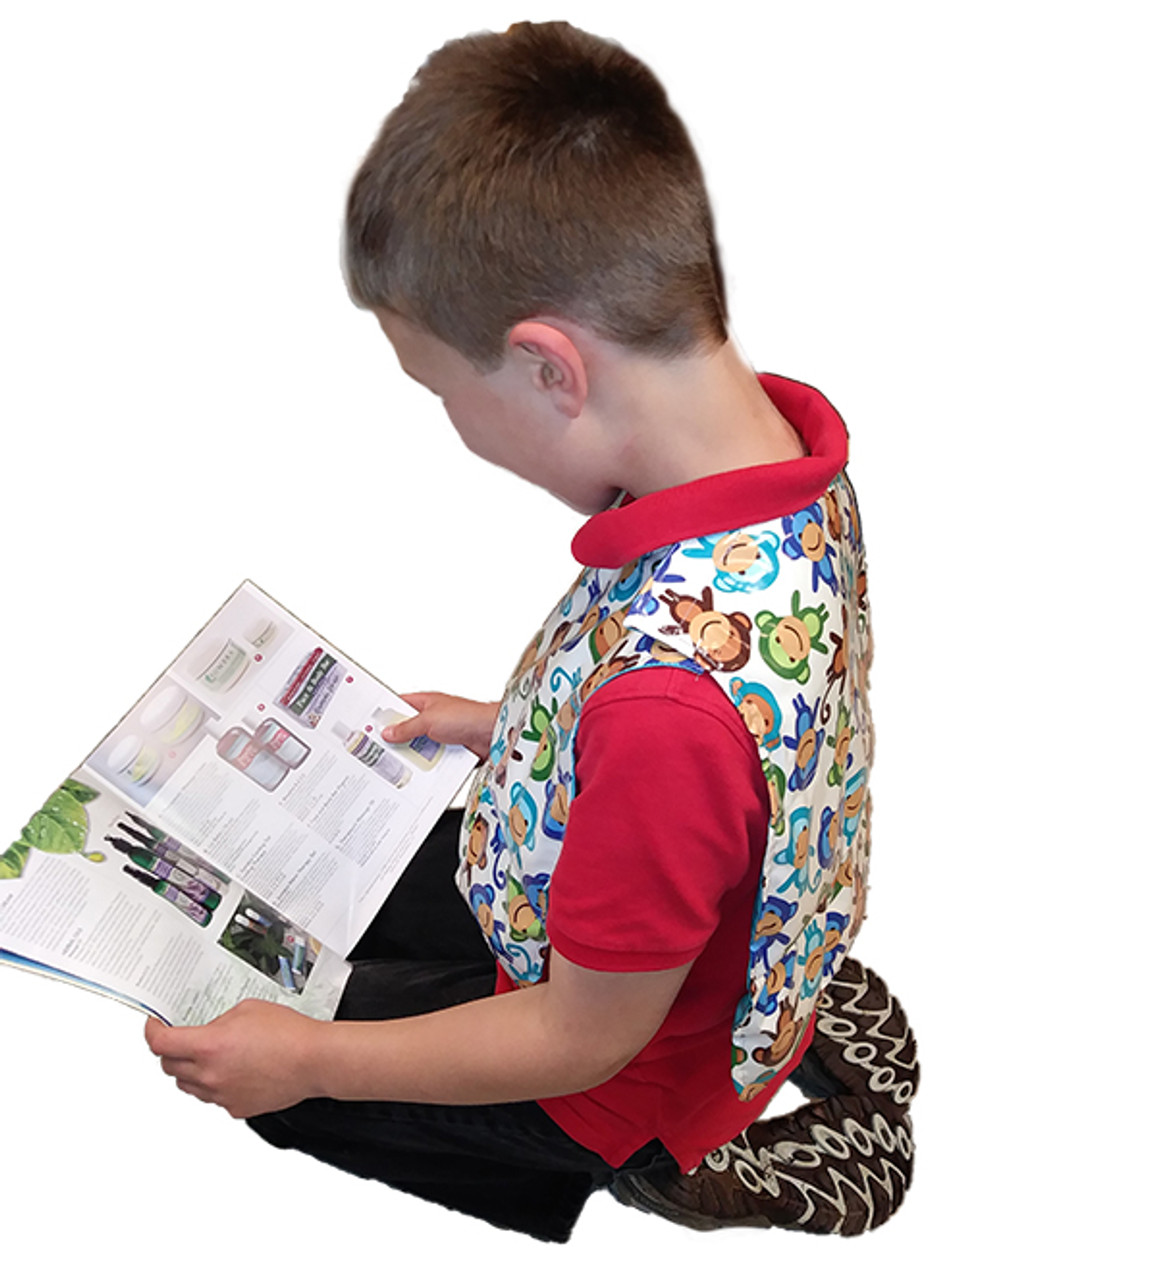 Weighted Washable Vest for Kids with Sensory Integration, Focusing, Relaxing, More. Made in Maine USA by Grampa's Garden